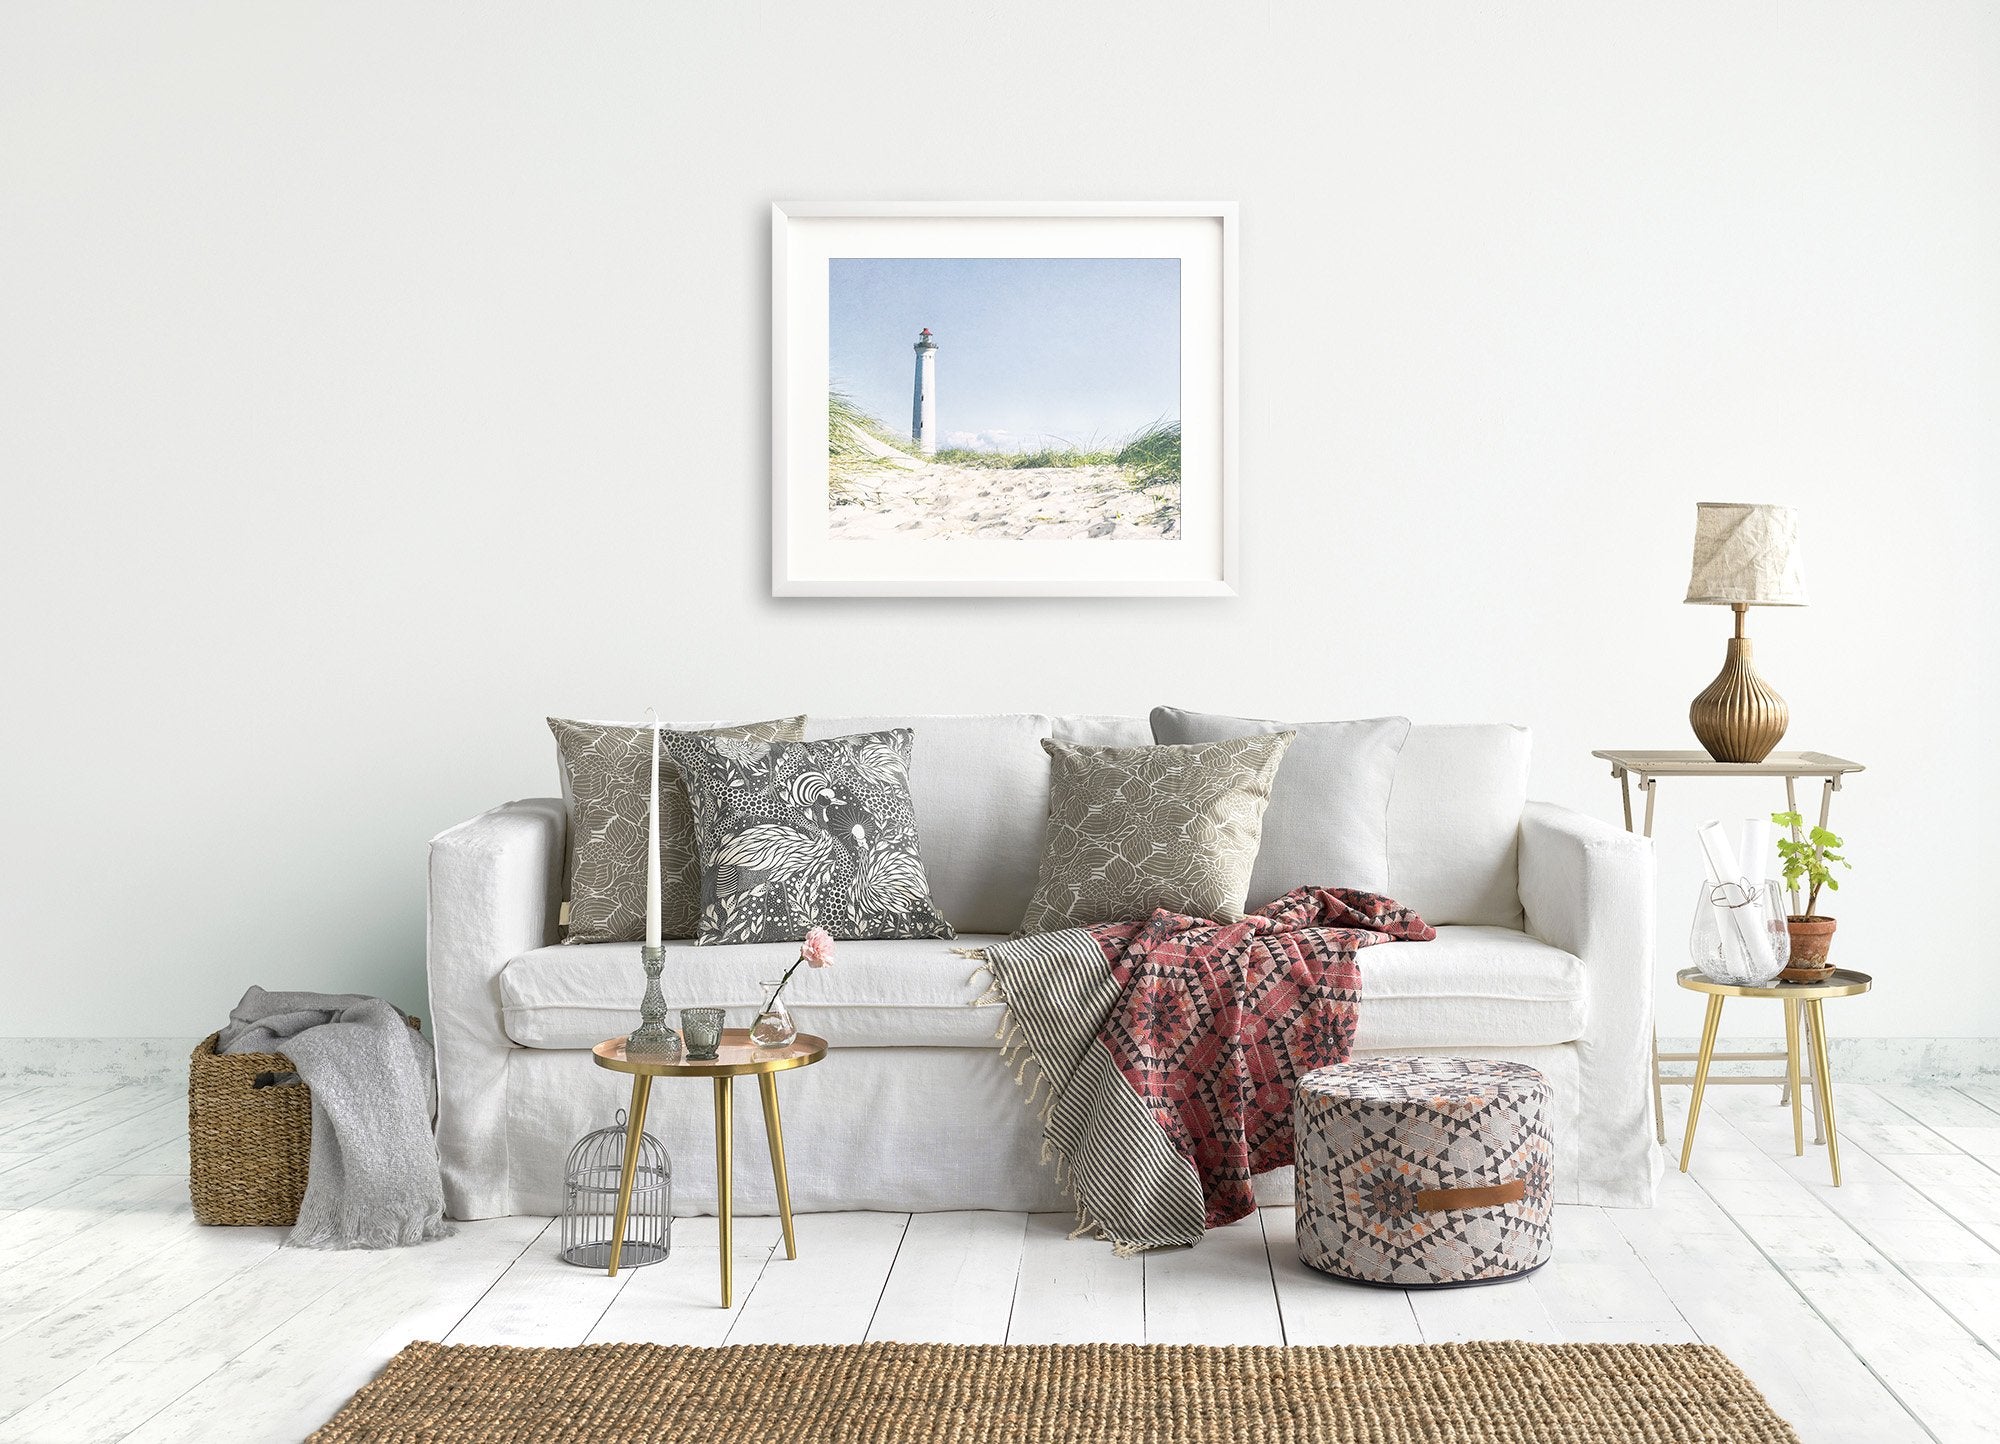 A serene living room featuring a white sofa adorned with various patterned cushions, a small round table, a wooden floor lamp, Offley Green&#39;s Nautical Print, &#39;The Lighthouse&#39; on the wall, and decorative items including plants and a woven basket.